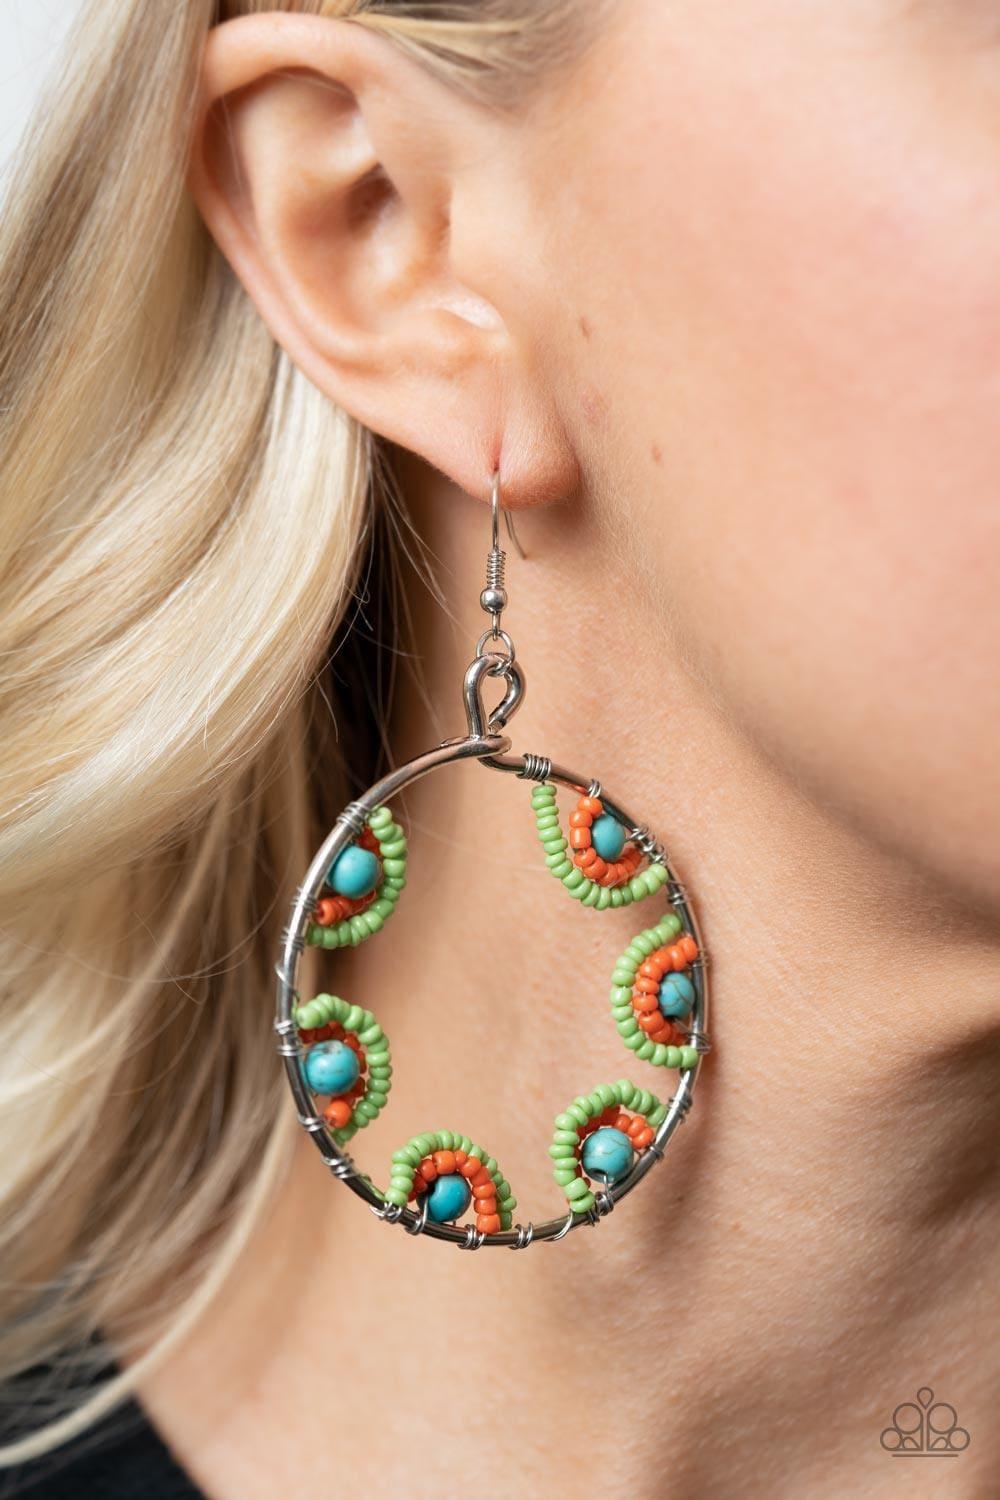 Paparazzi Accessories - Off The Rim - Multicolor Earrings - Bling by JessieK